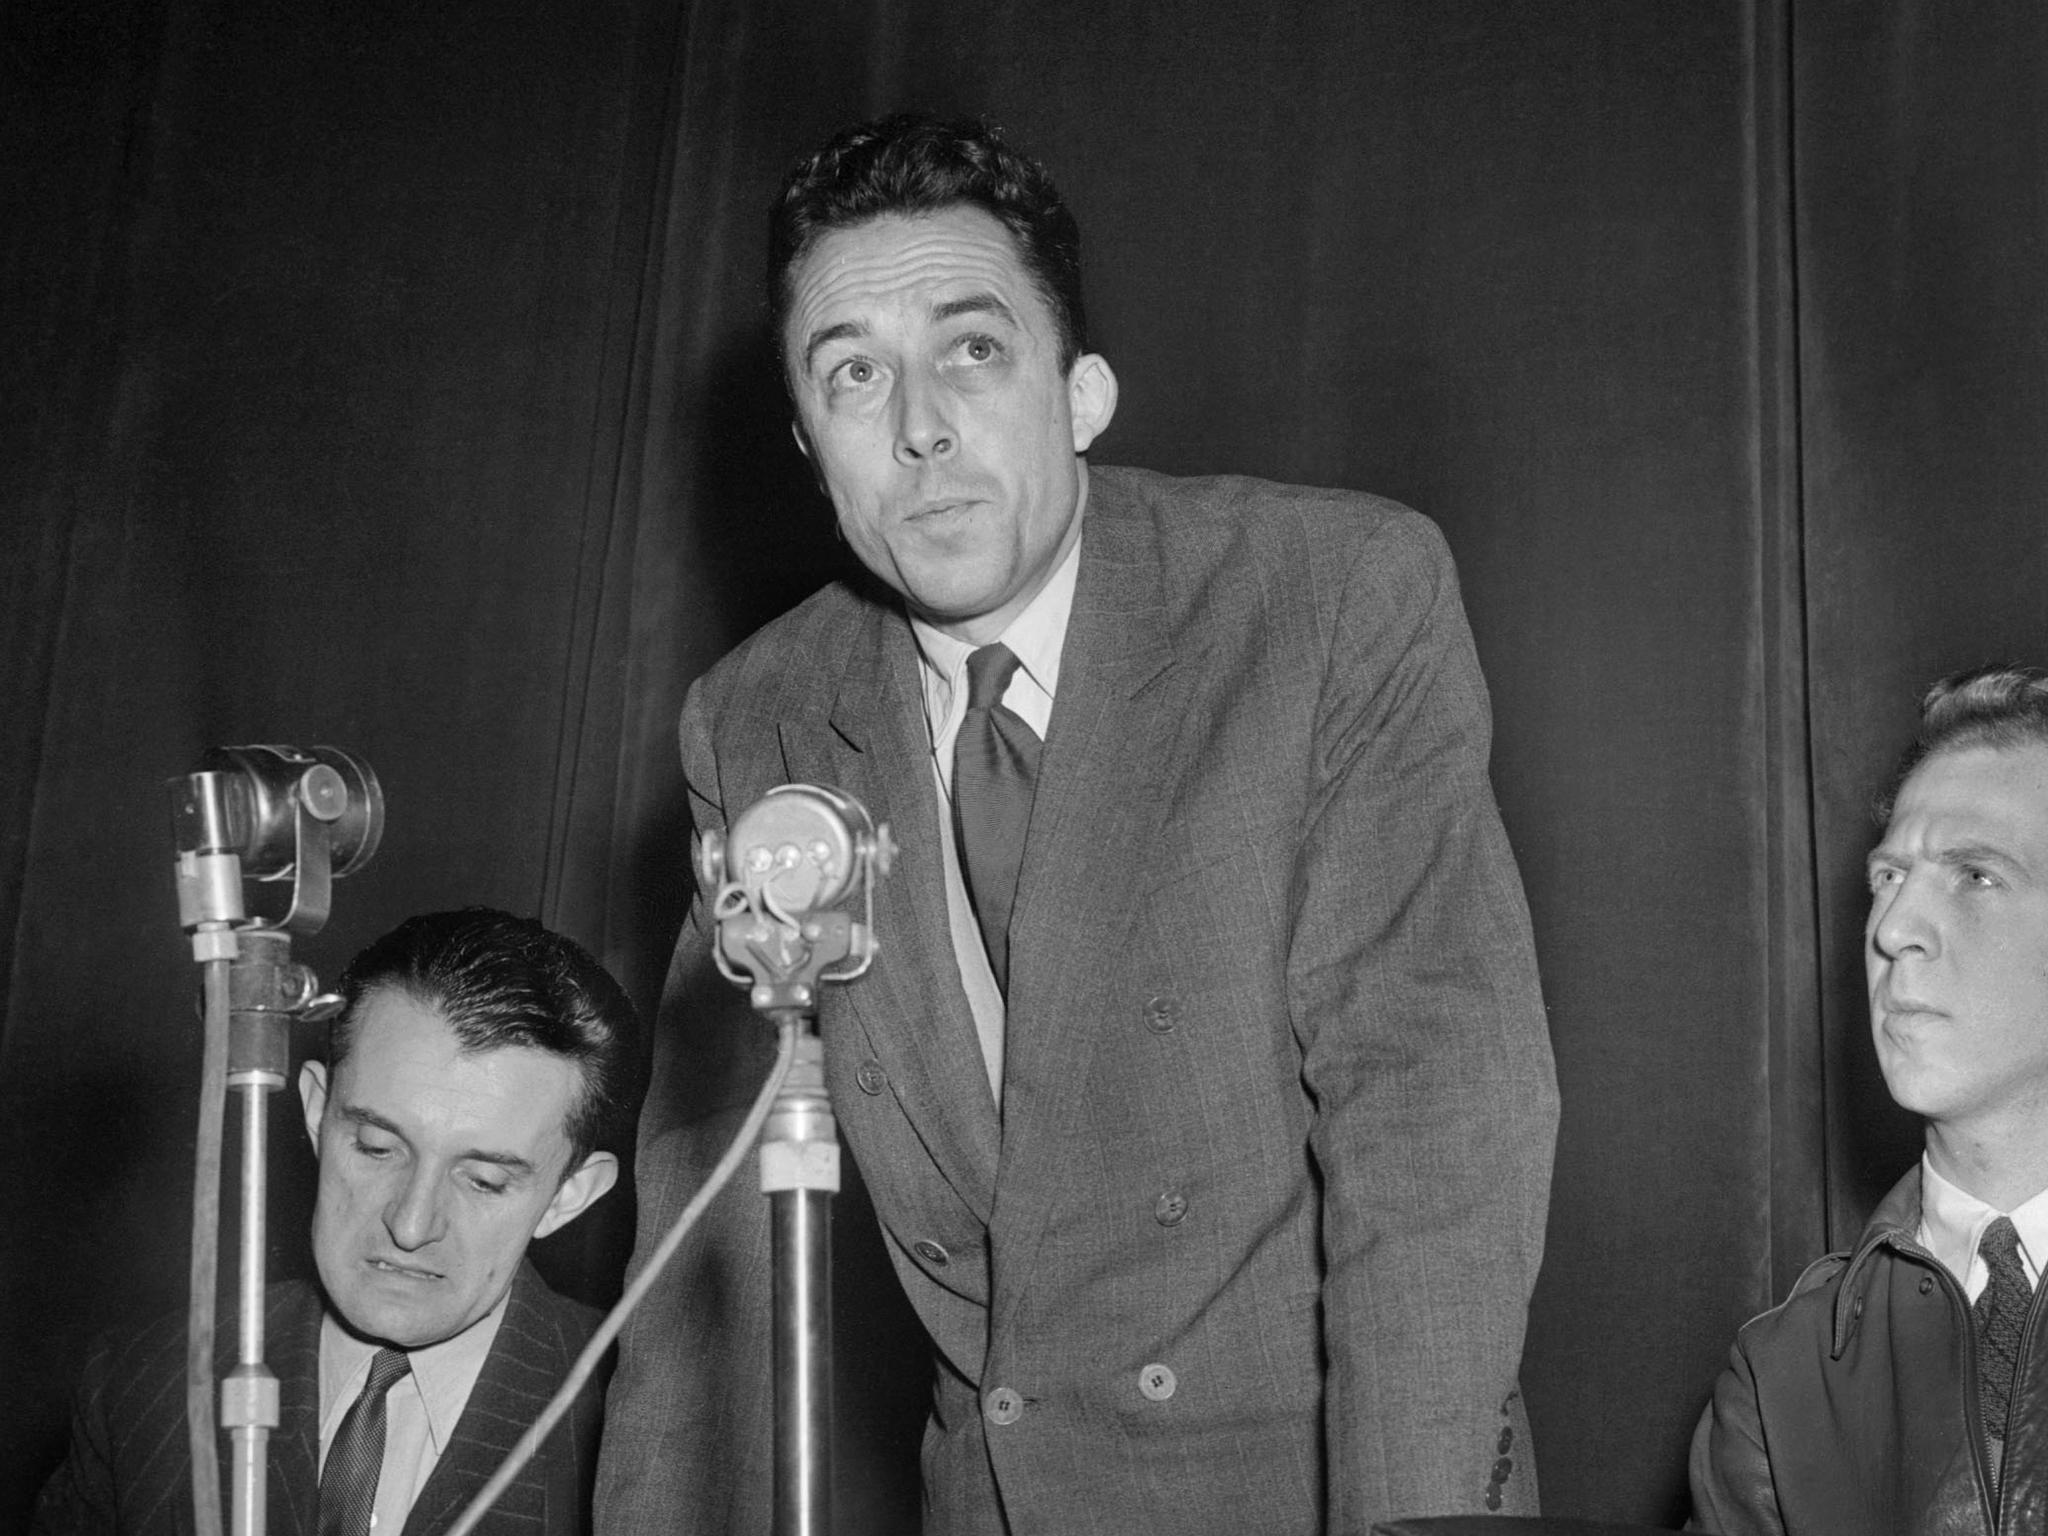 Camus, the Bogart of French philosophy, believed in the right to be 'ugly'